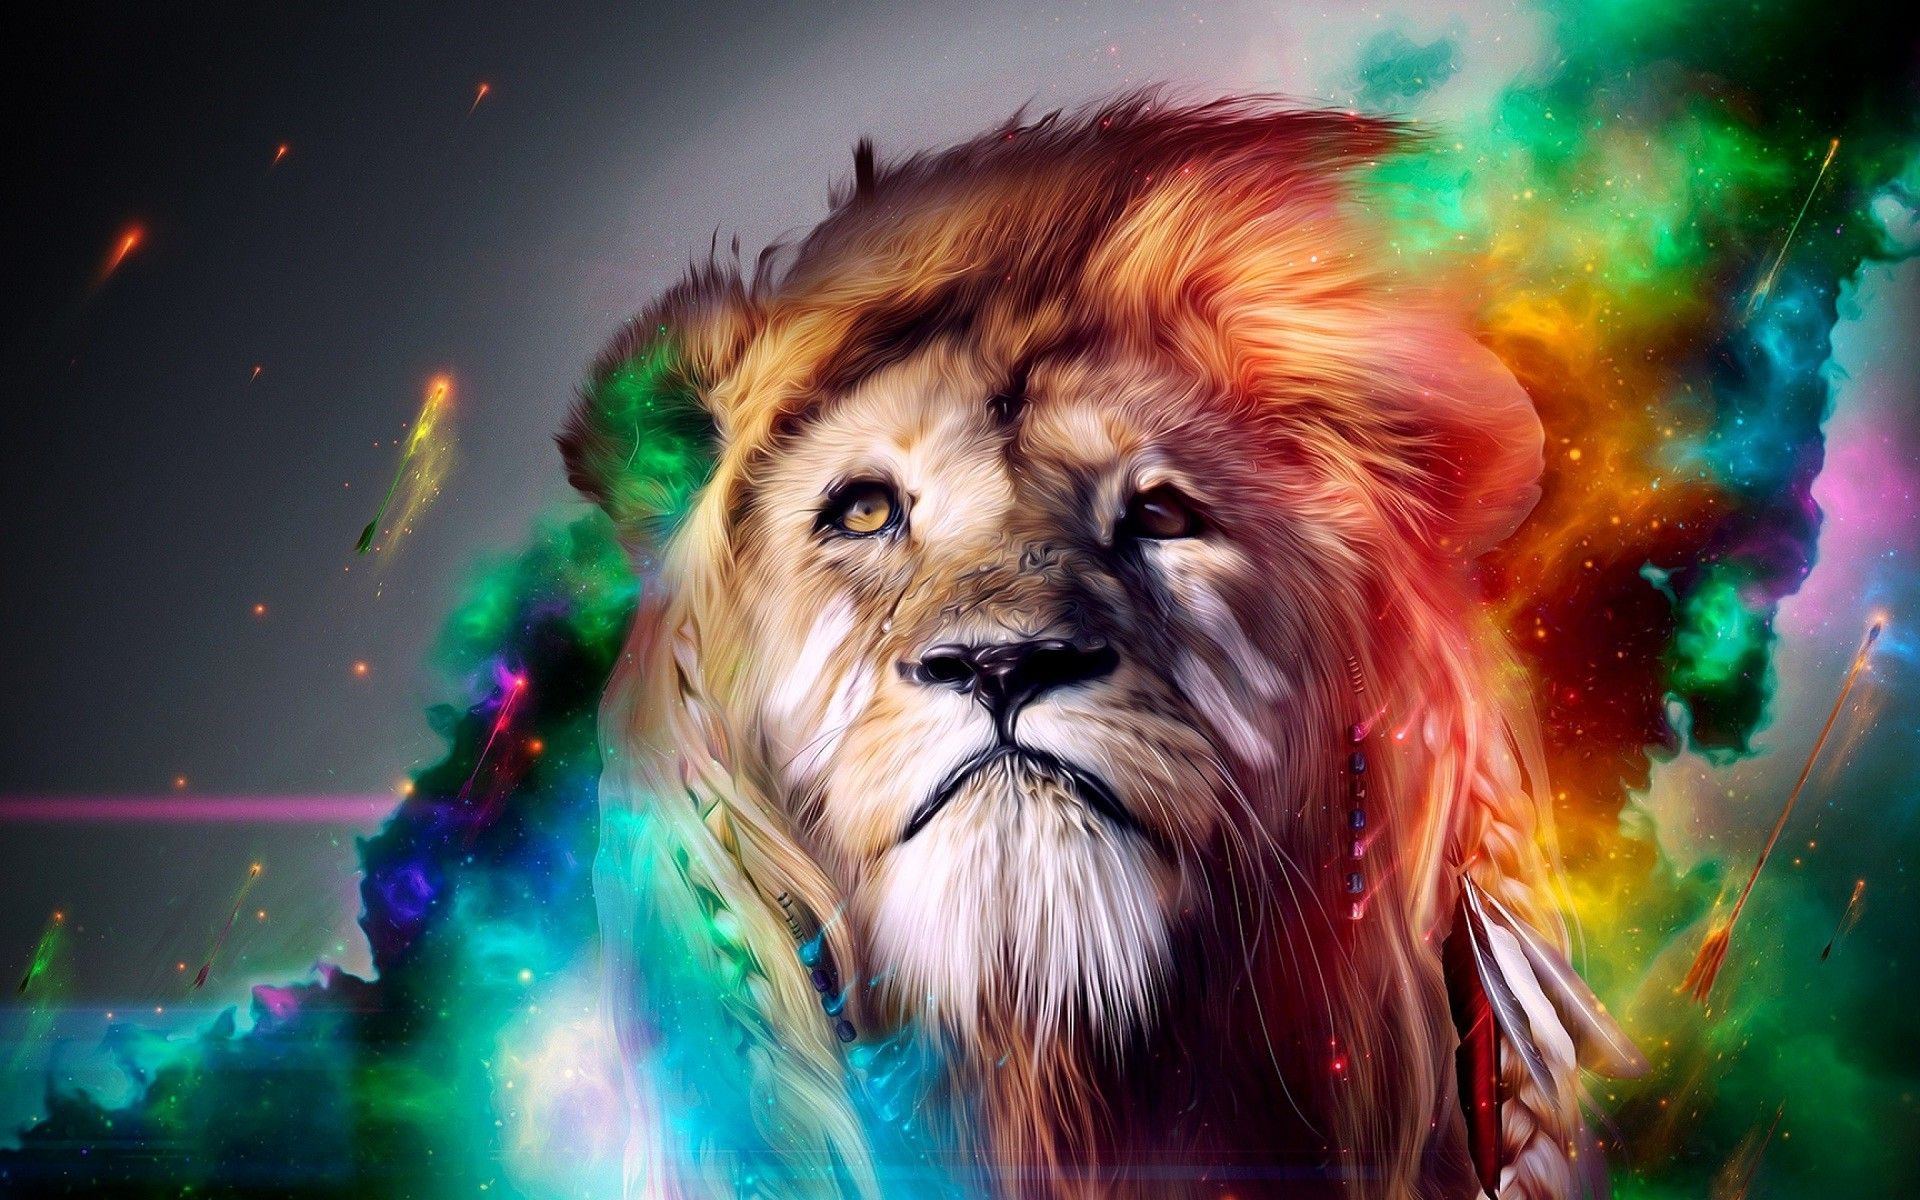 Full Hd And 3d Wallpapers - Lion Image 3d Download - HD Wallpaper 